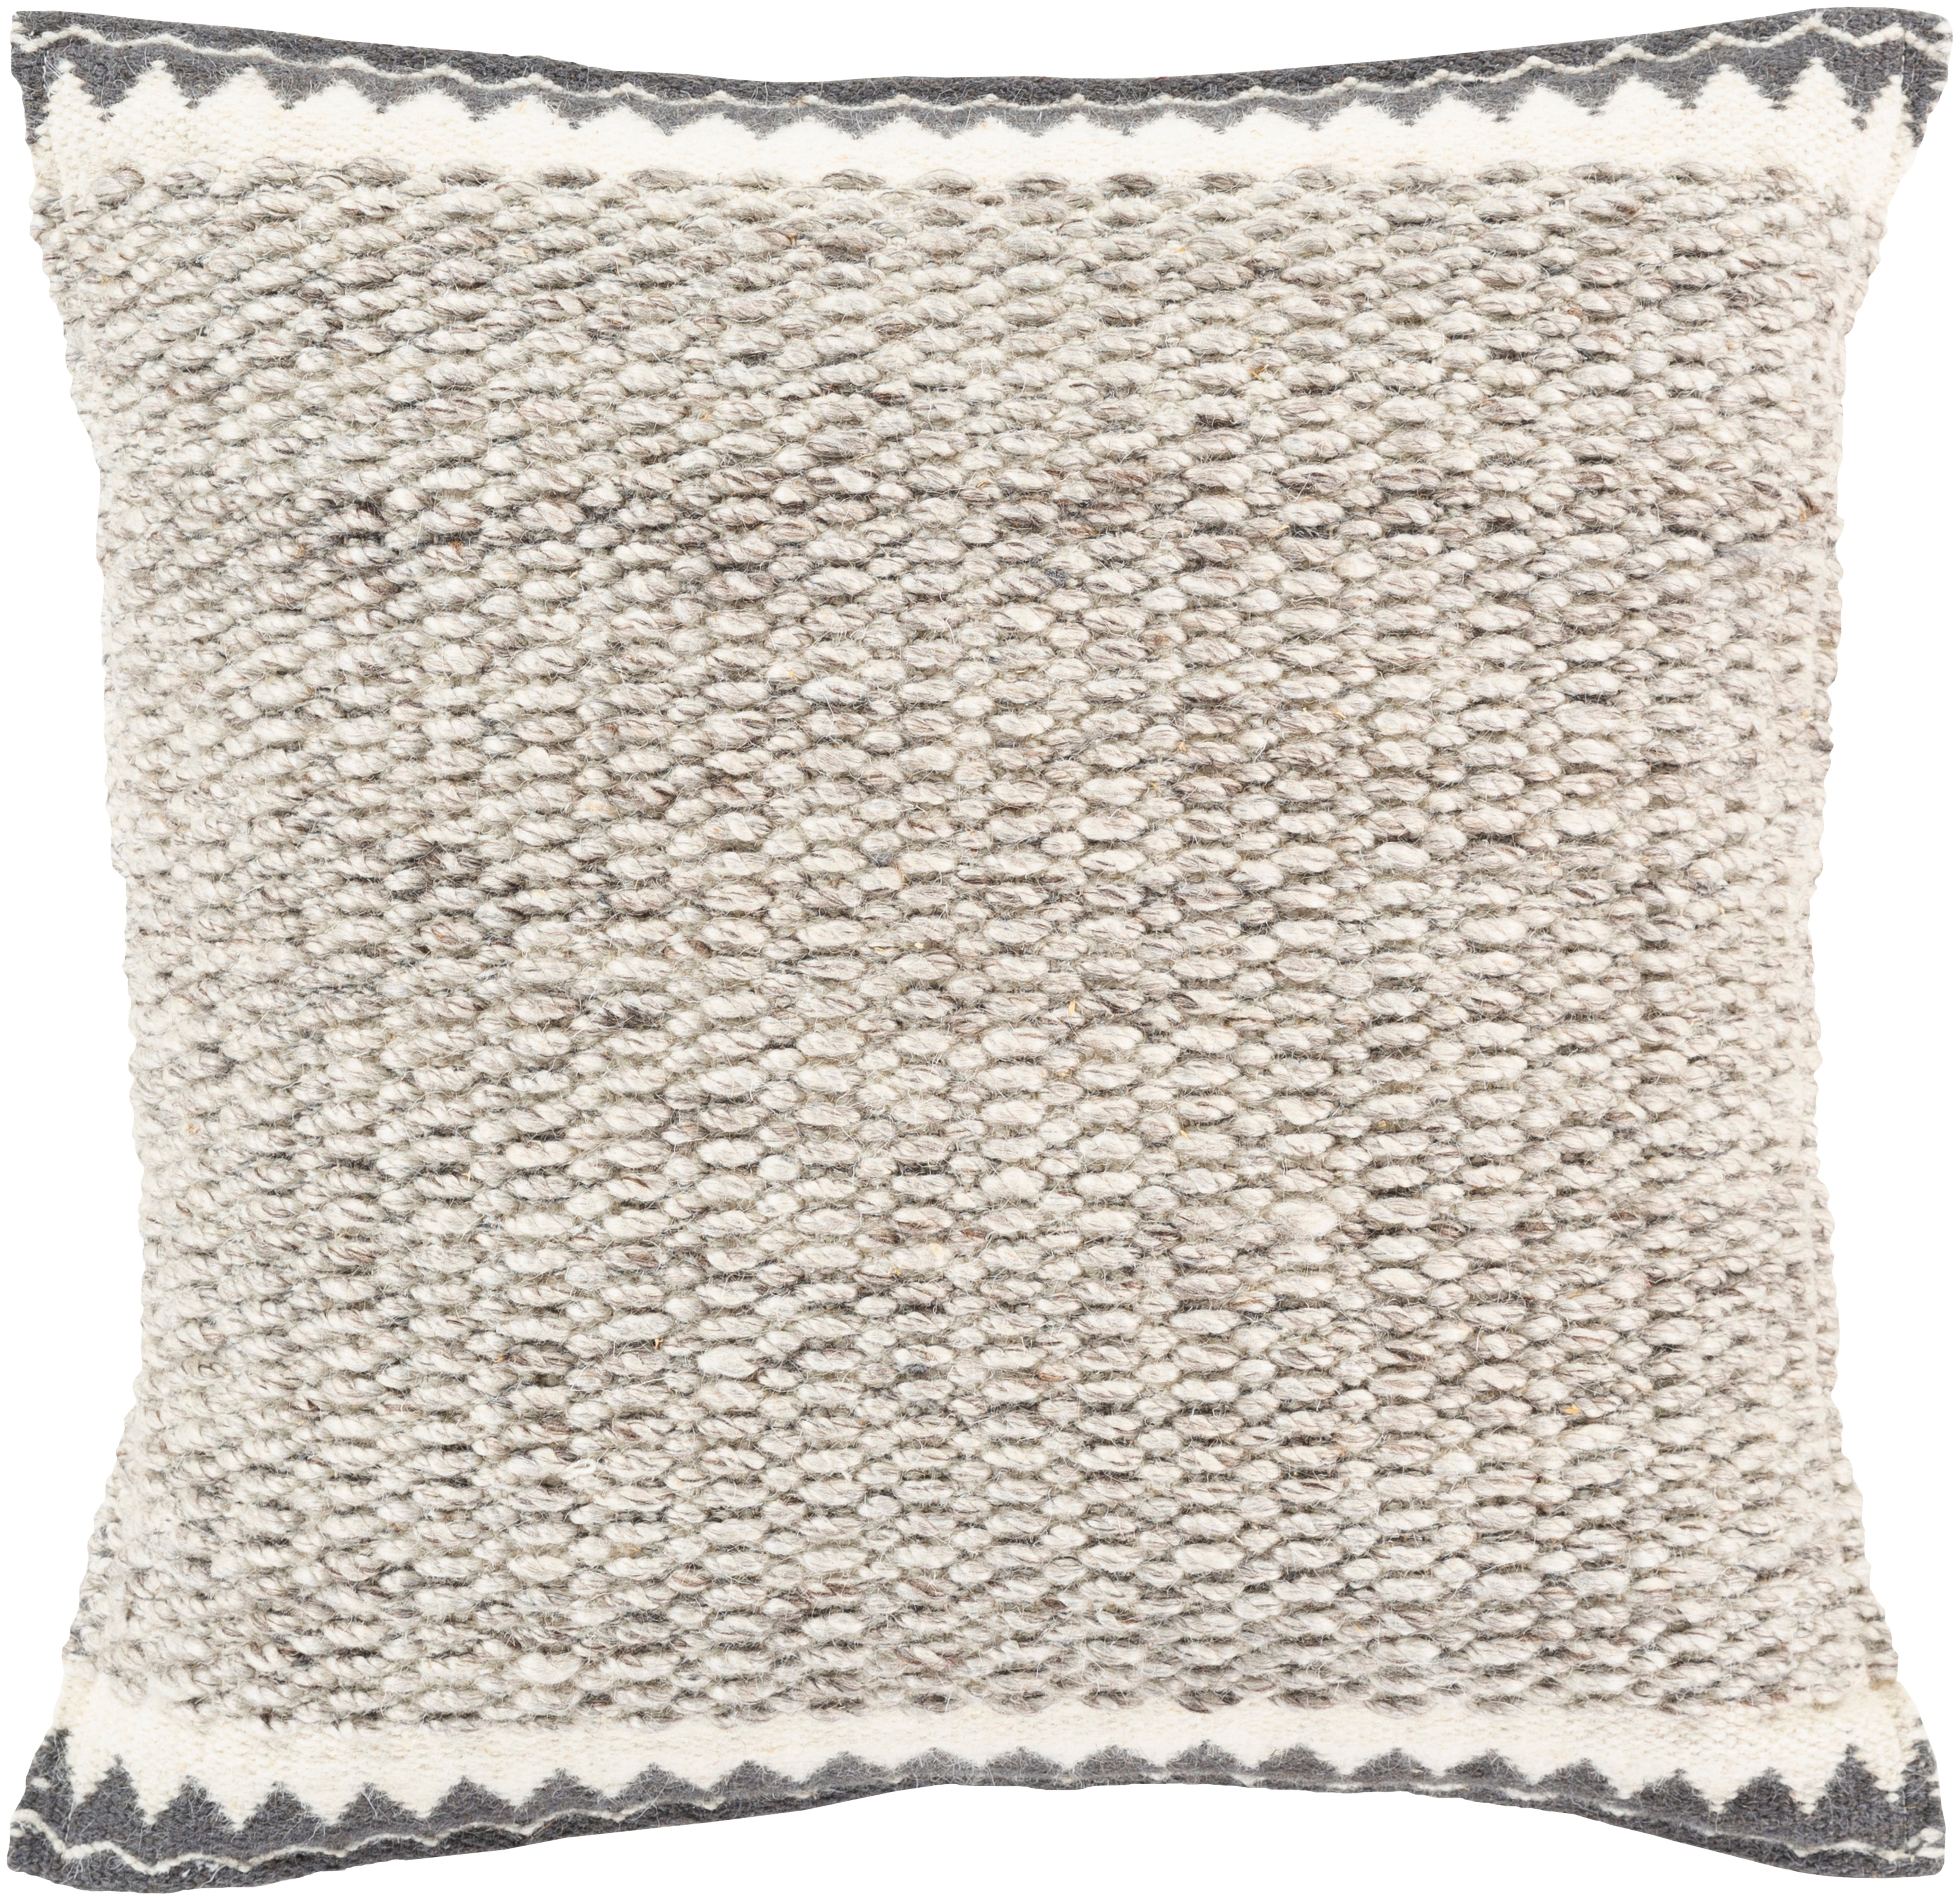 Faroe, 22" Pillow with Poly Insert - Neva Home